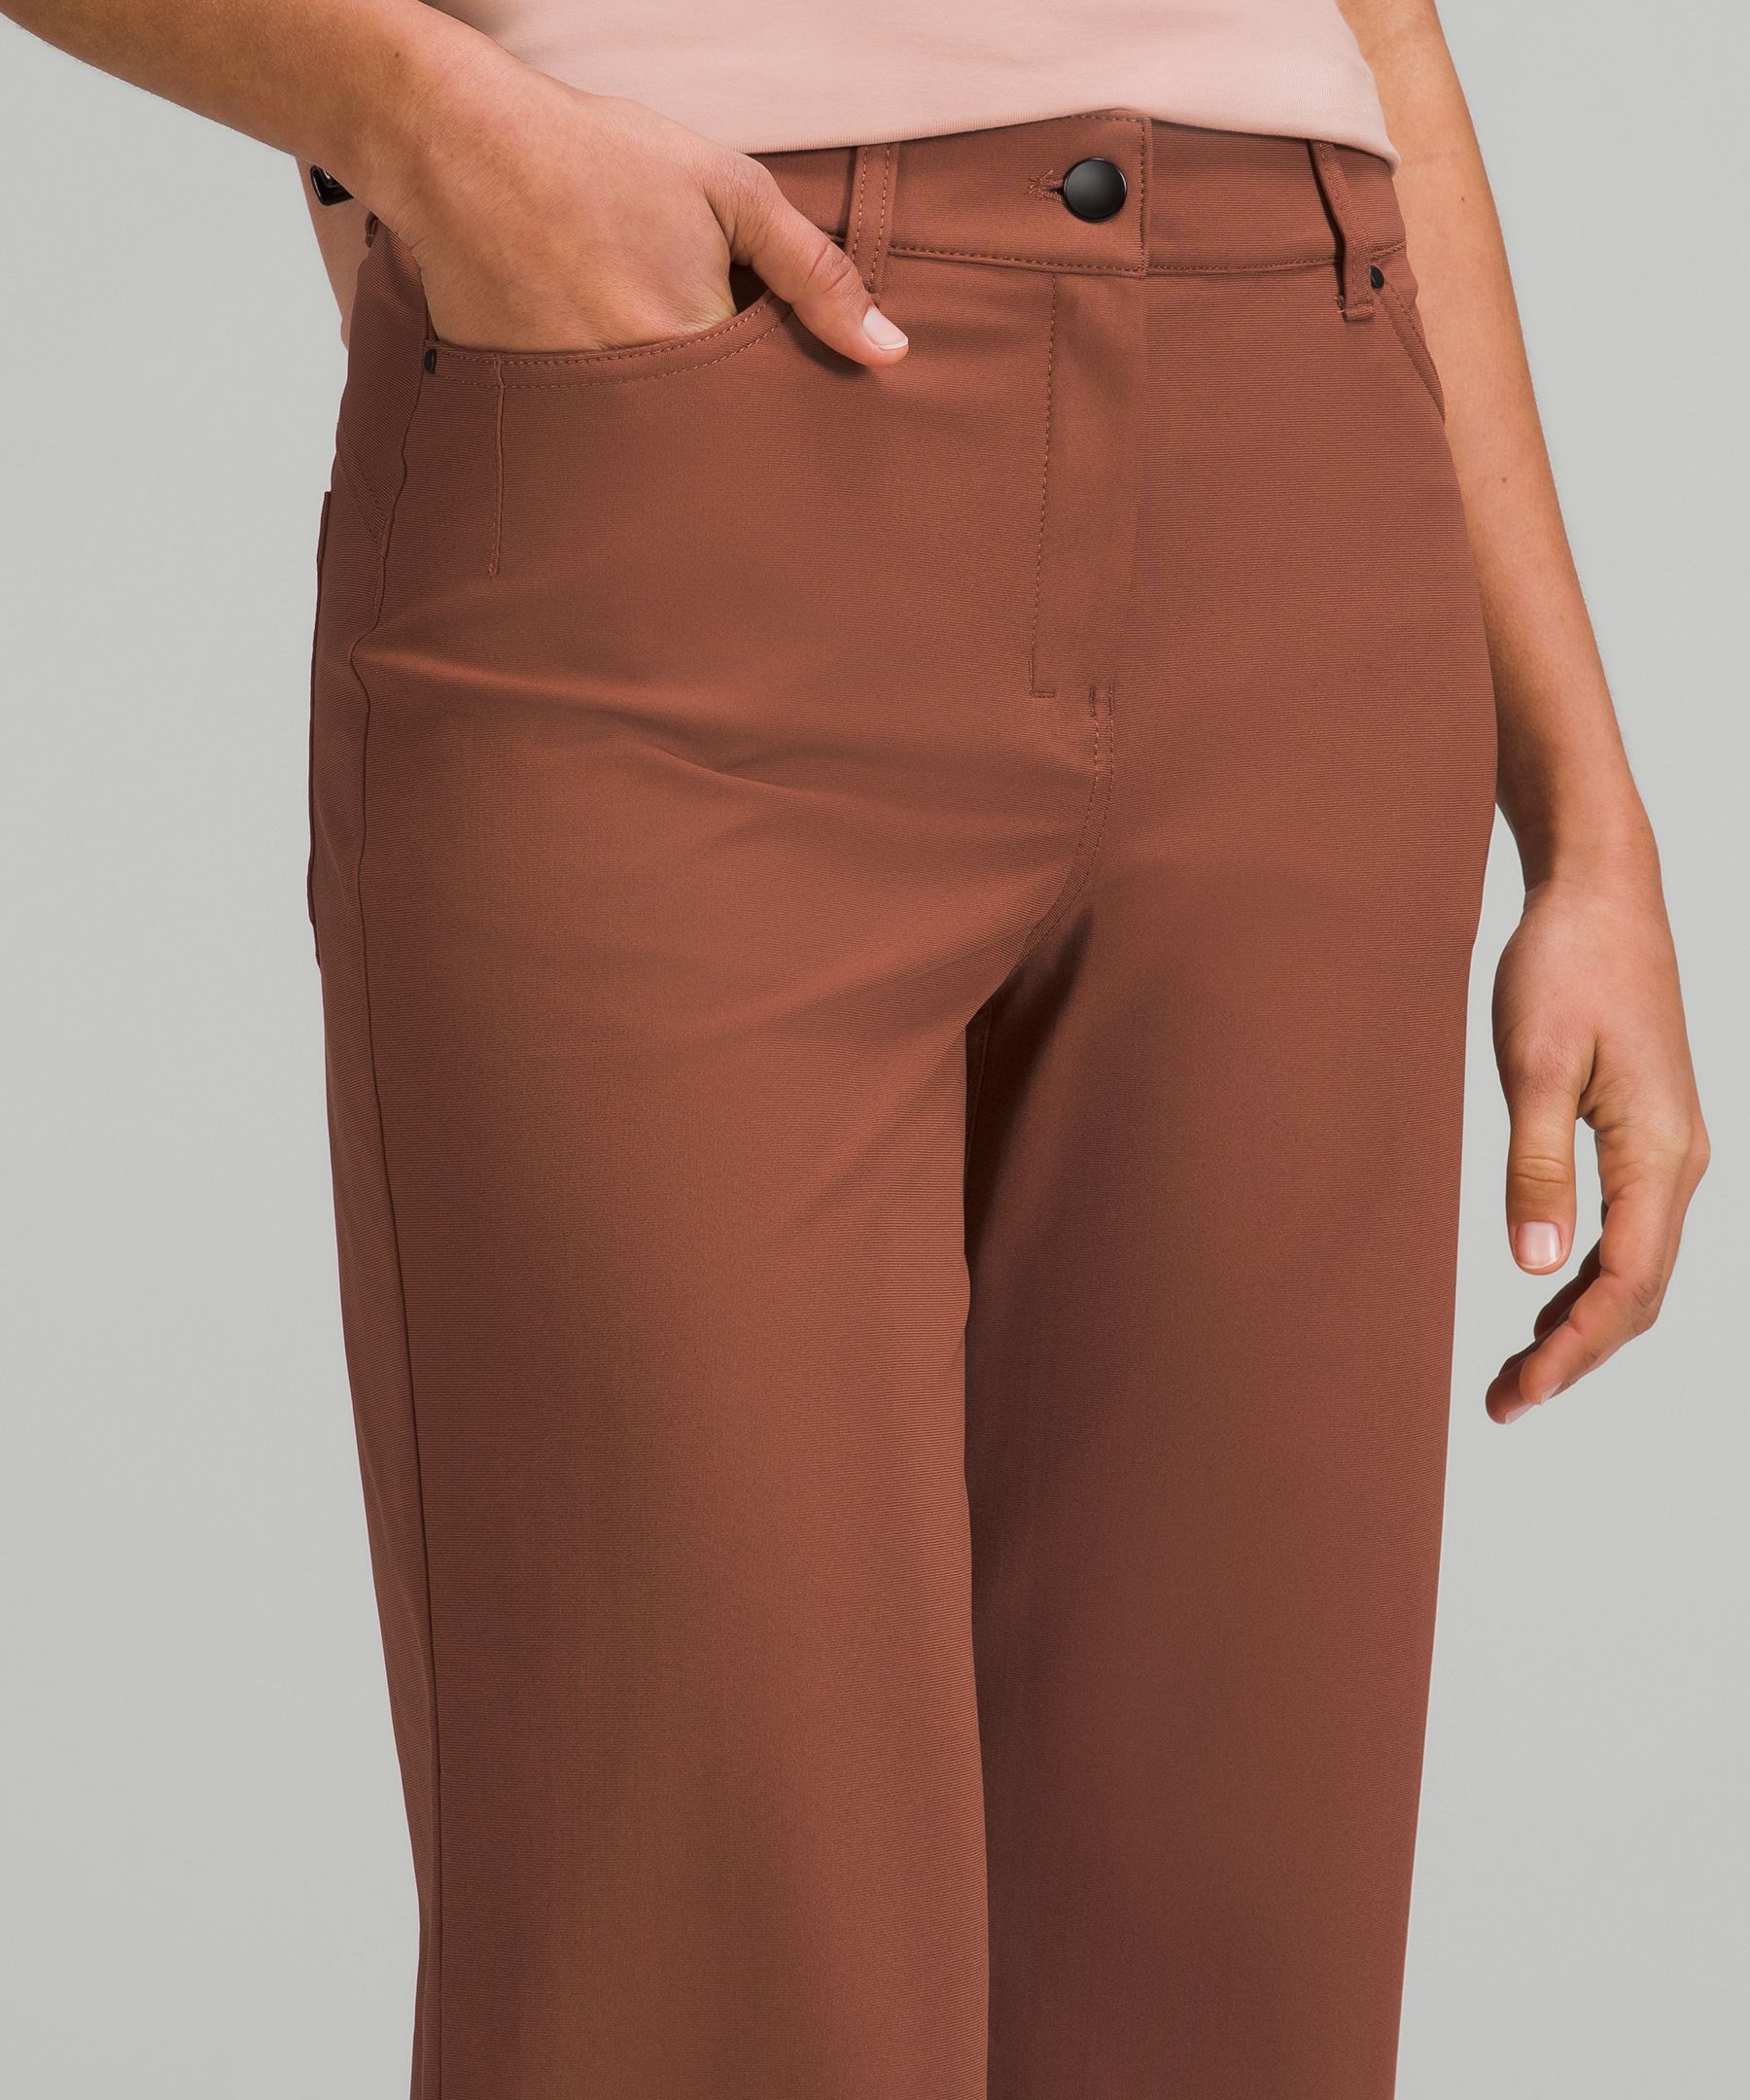 the new city sleek 5 pocket wide leg high rise pants in roasted brown is so  versatile for fall! utilitech fabric is fantastic and lightweight but has  more of a typical pant